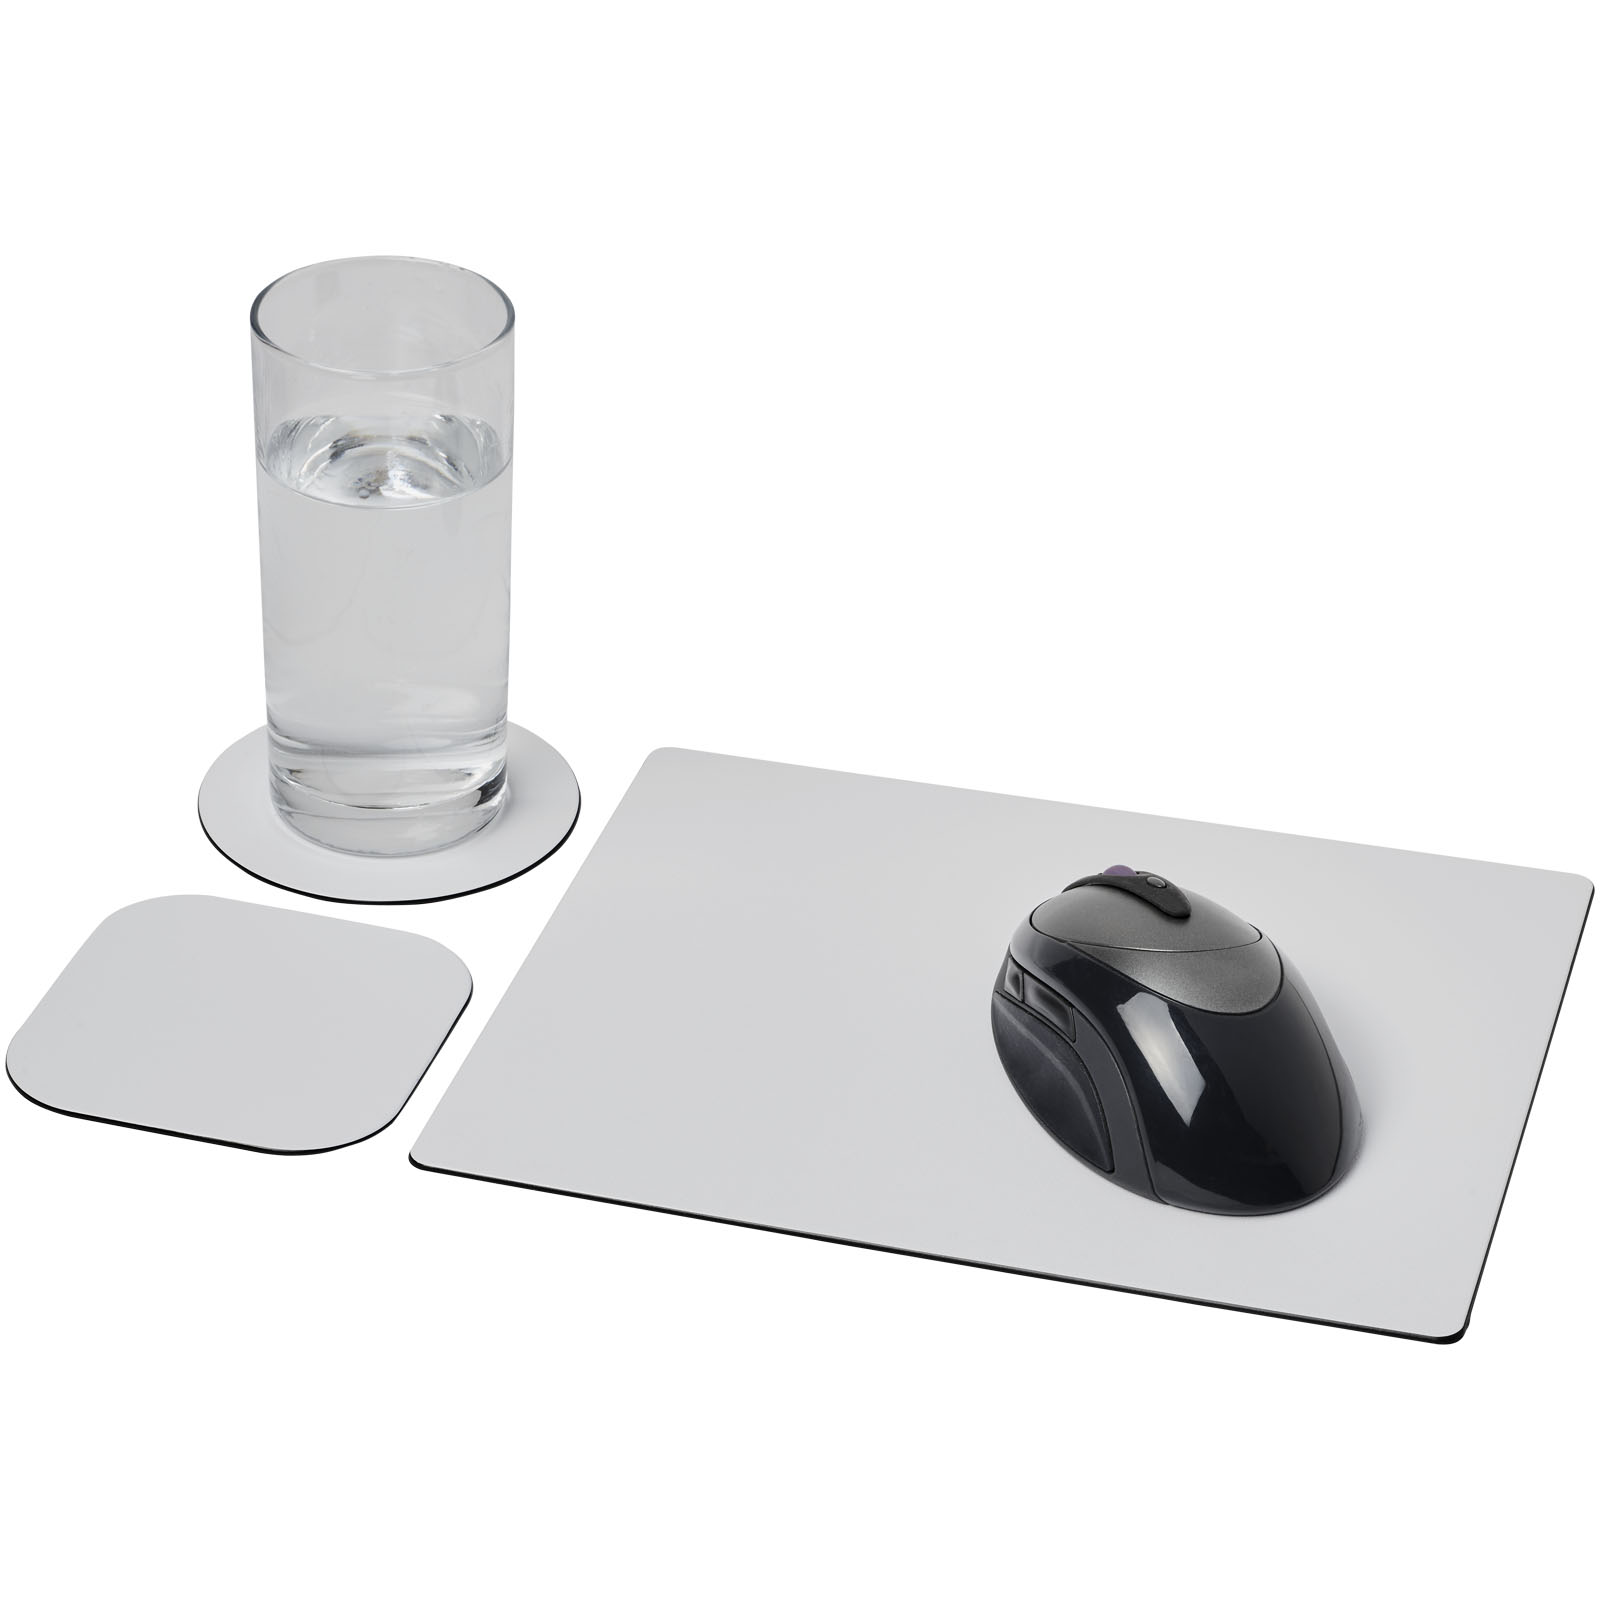 Advertising Computer Accessories - Brite-Mat® mouse mat and coaster set combo 1 - 0